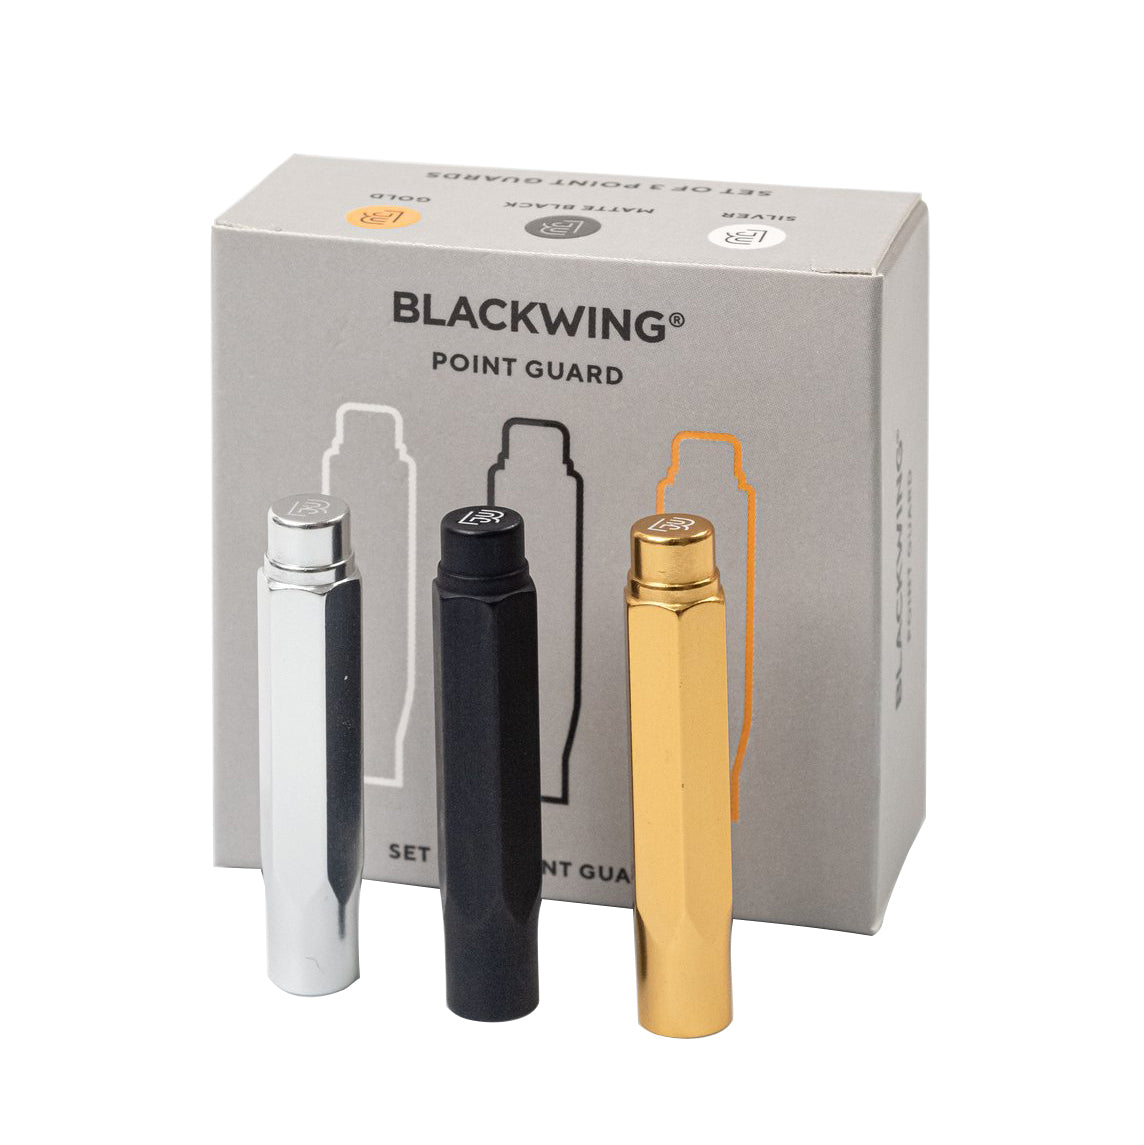 Blackwing Point Guard - Set of 3